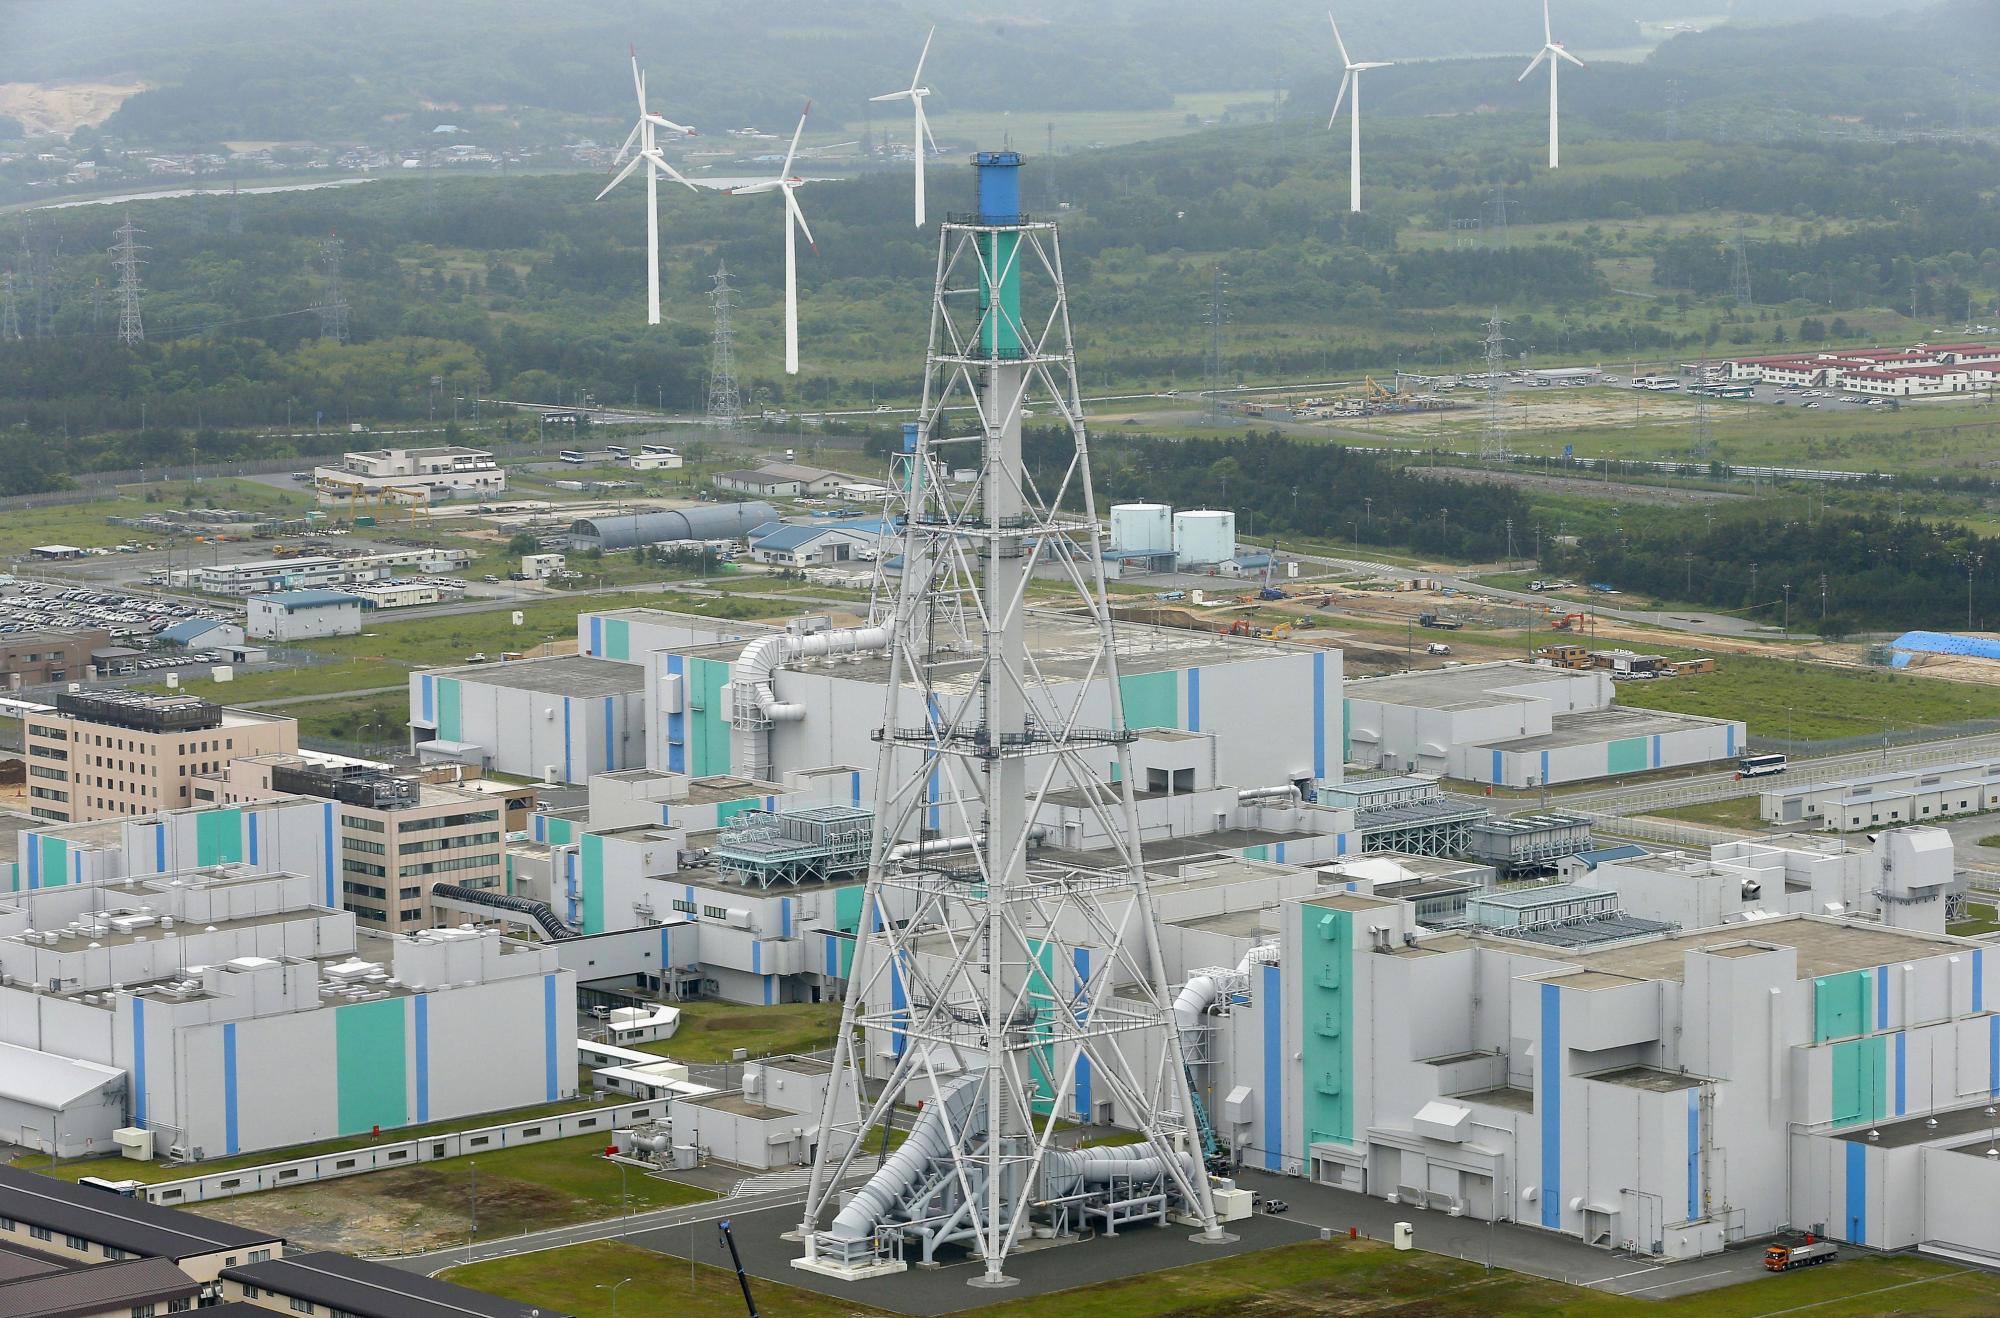 A reprocessing plant for spent nuclear fuel is seen in the village of Rokkasho, Aomori Prefecture. Japan plans to seek a nuclear pact with the United States that will renew automatically, sources said Tuesday. | KYODO